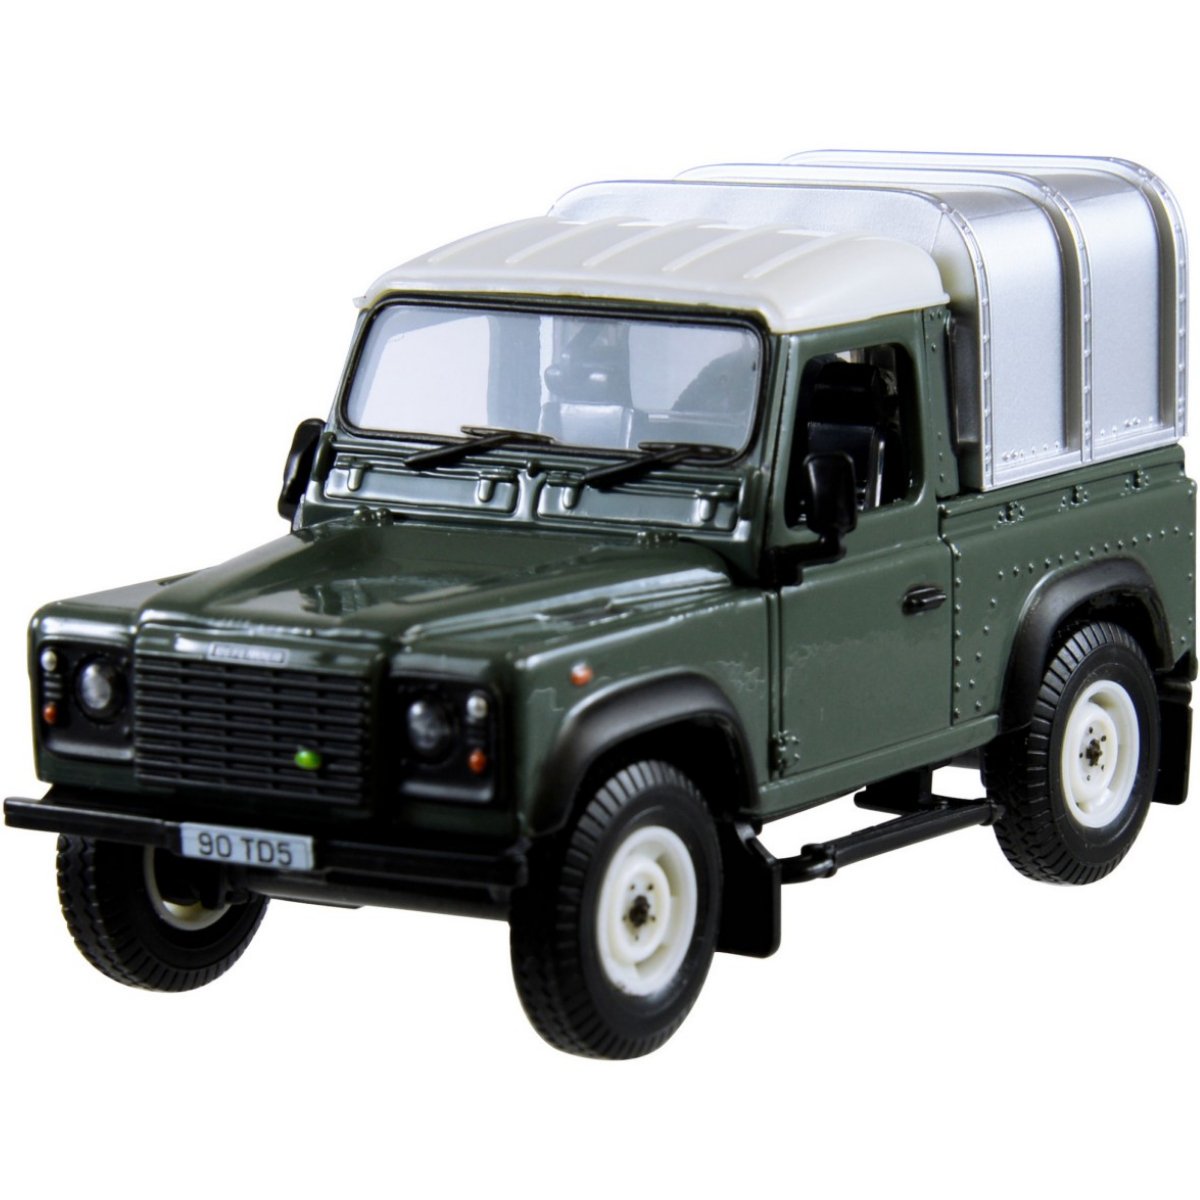 Britains Green Land Rover Defender 90 & Canopy - 1:32 Scale - Phillips Hobbies